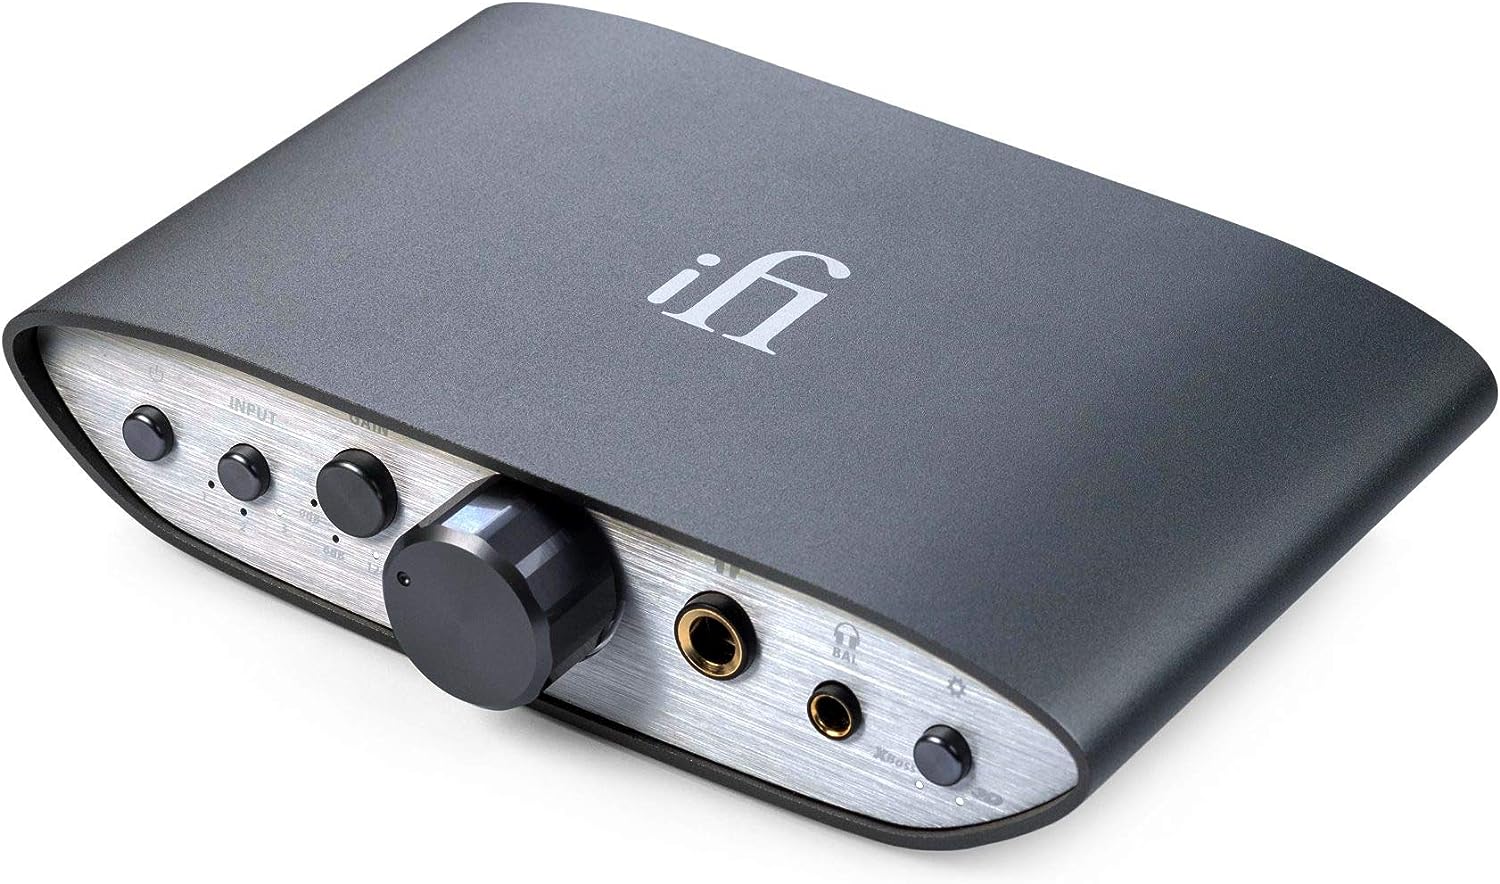 Zenith of Sound: A Review of the iFi Audio Zen CAN Headphone Amplifier